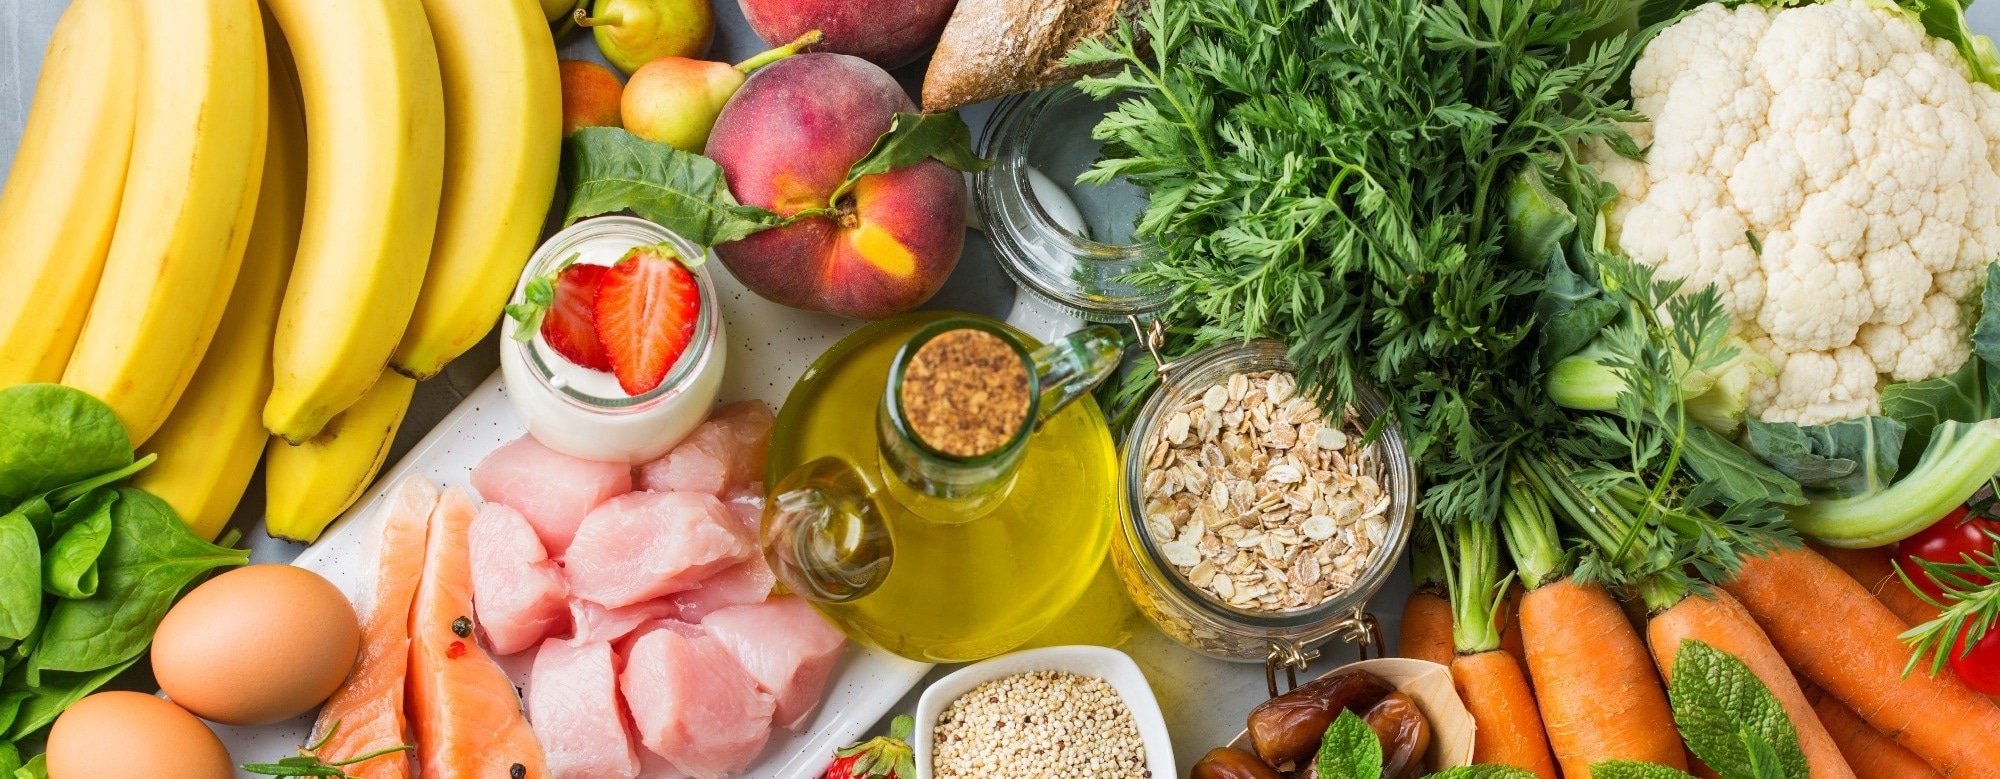 Mediterranean diet in pregnancy: A recipe for reduced stress and improved sleep